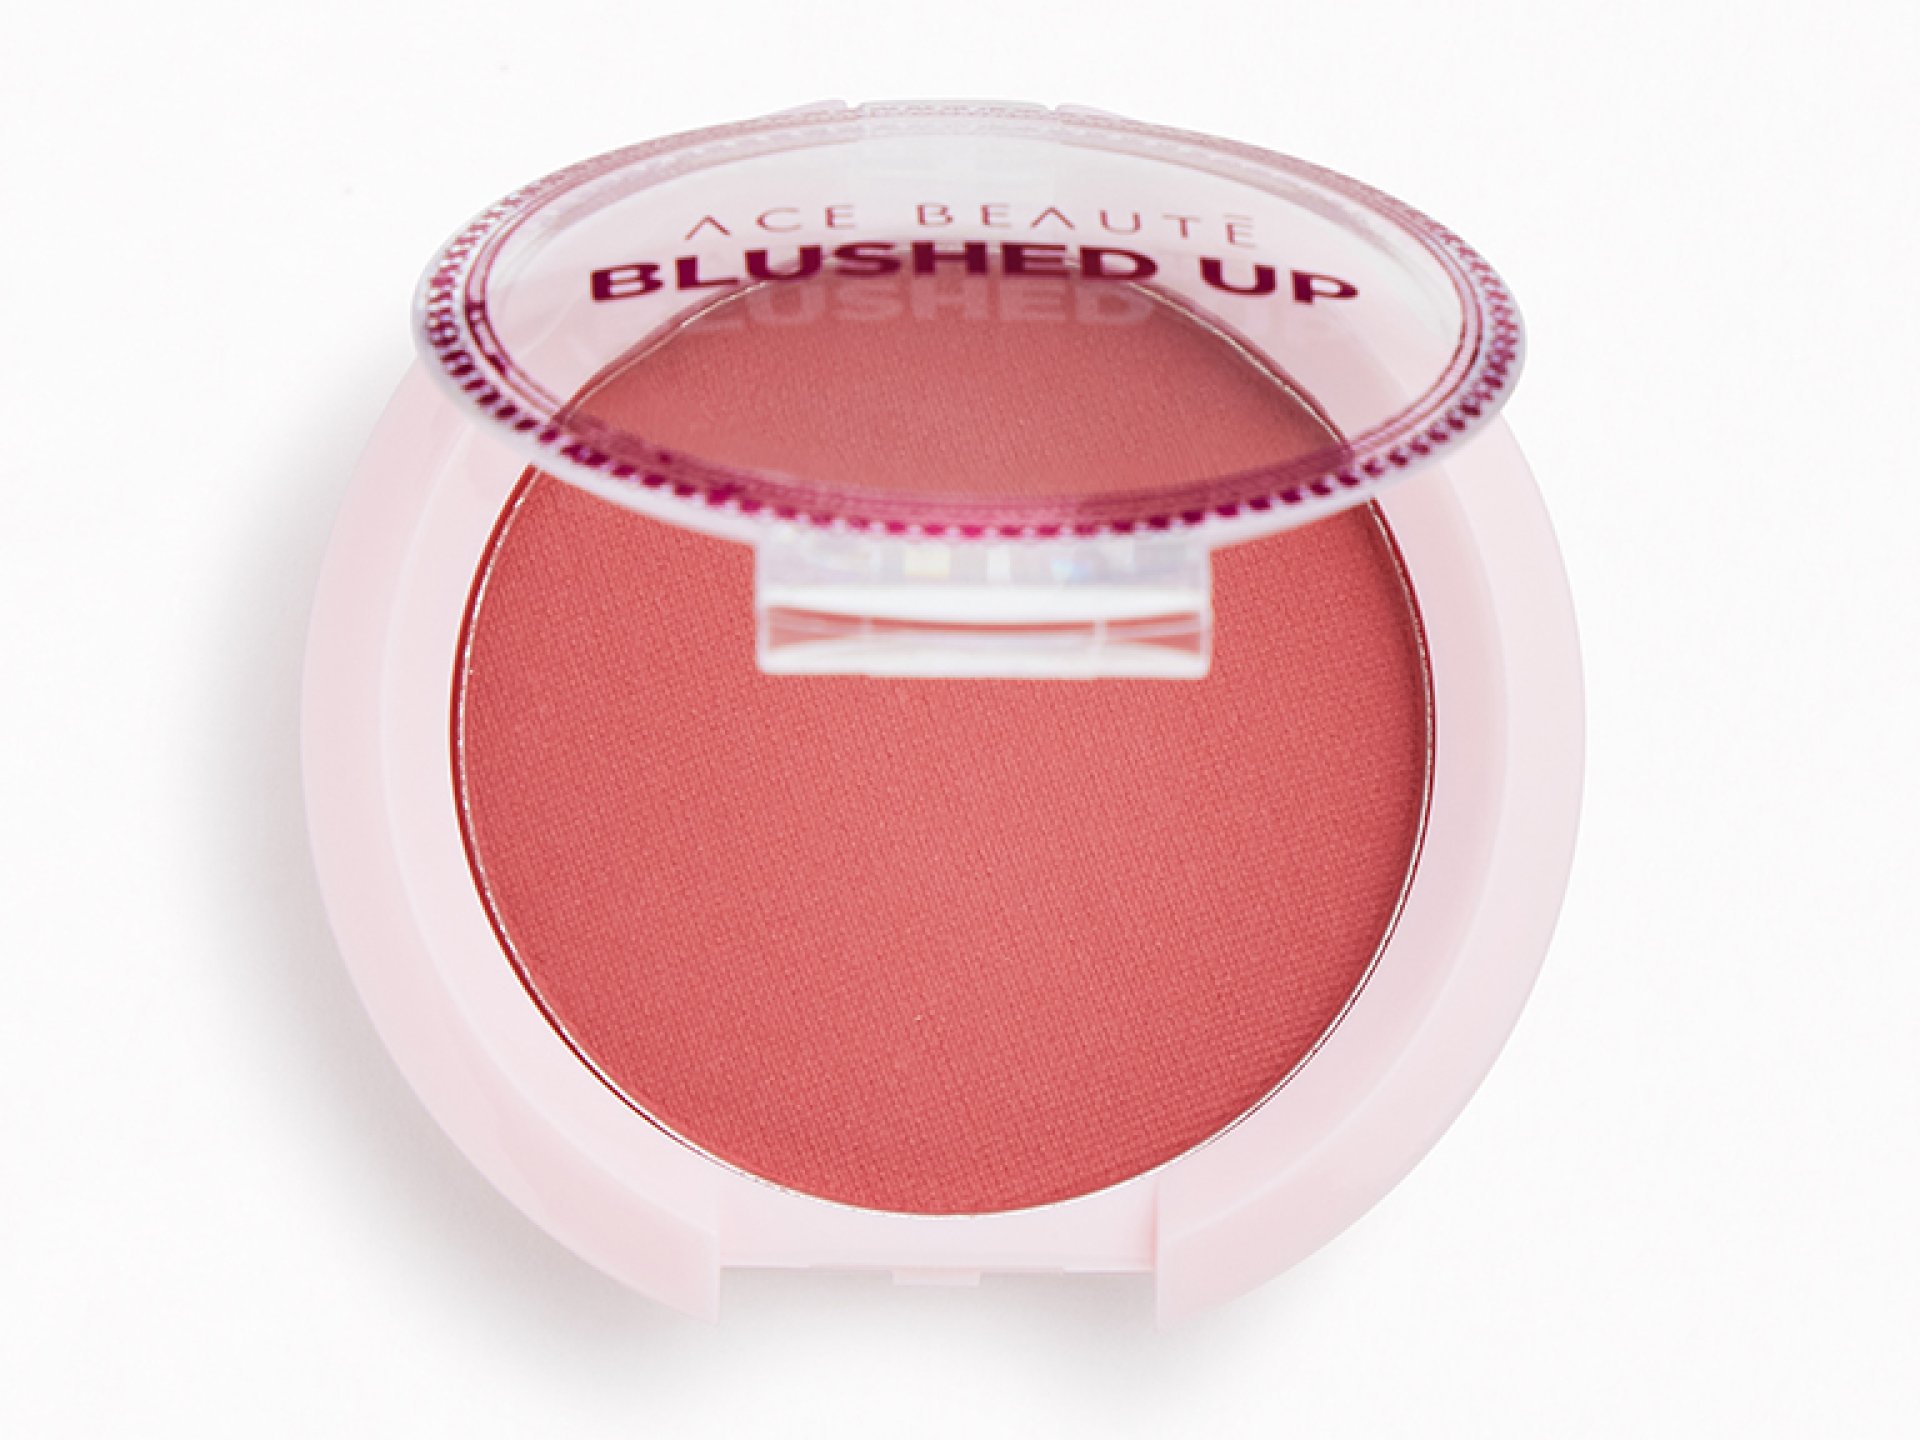 ACE BEAUTÉ Blushed Up Blush in Rosy